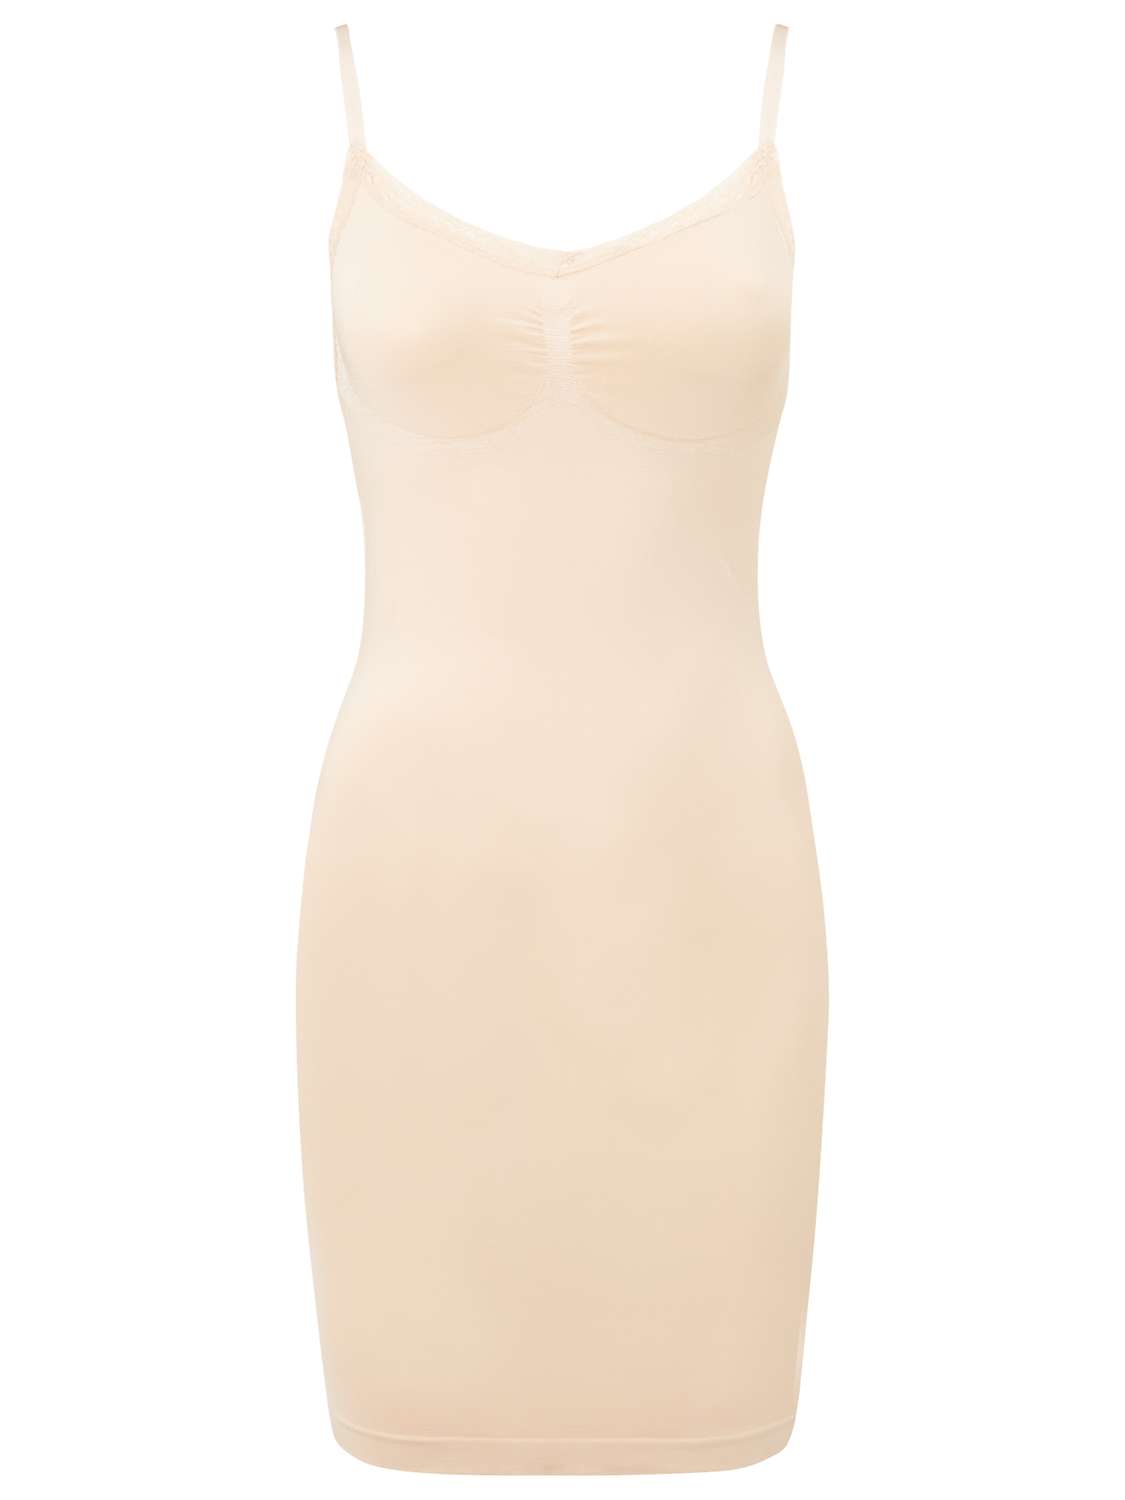 Buy Phase Eight Silhouette Seamless Slip Online at johnlewis.com